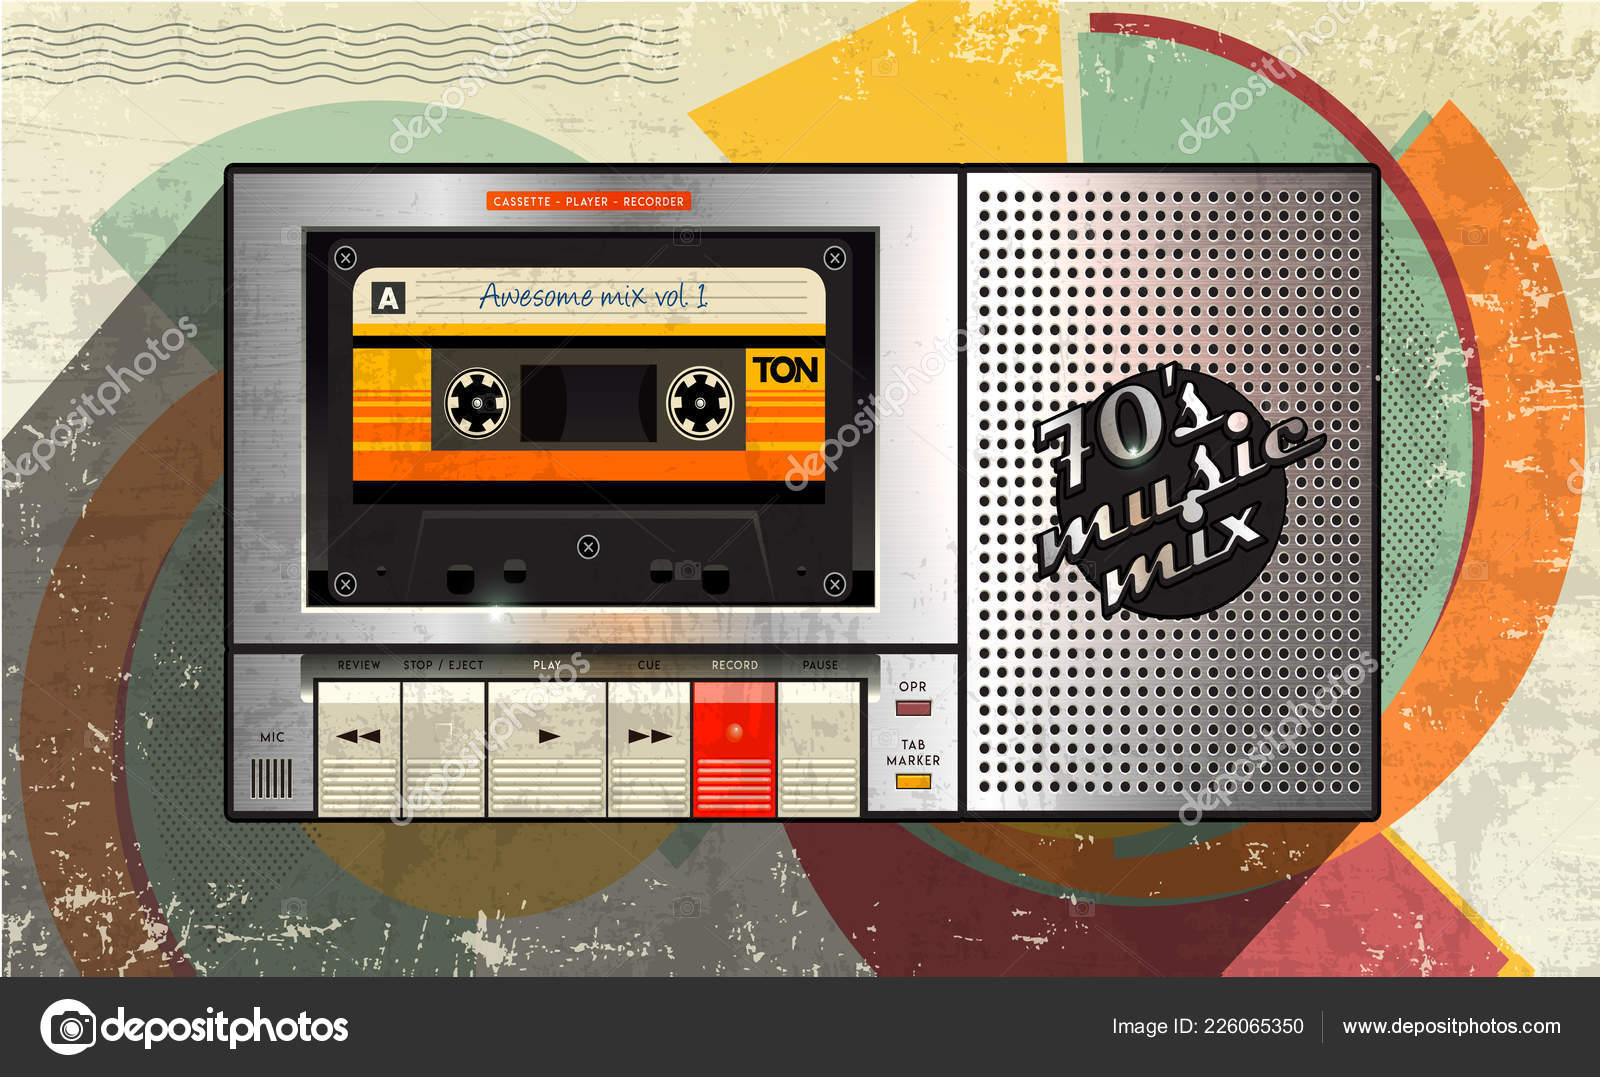 Cassettophone Music Cover Awesome Mix Volume Retro Cassette Recorder Player Vector Image By C Brainpencil1 Vector Stock 226065350